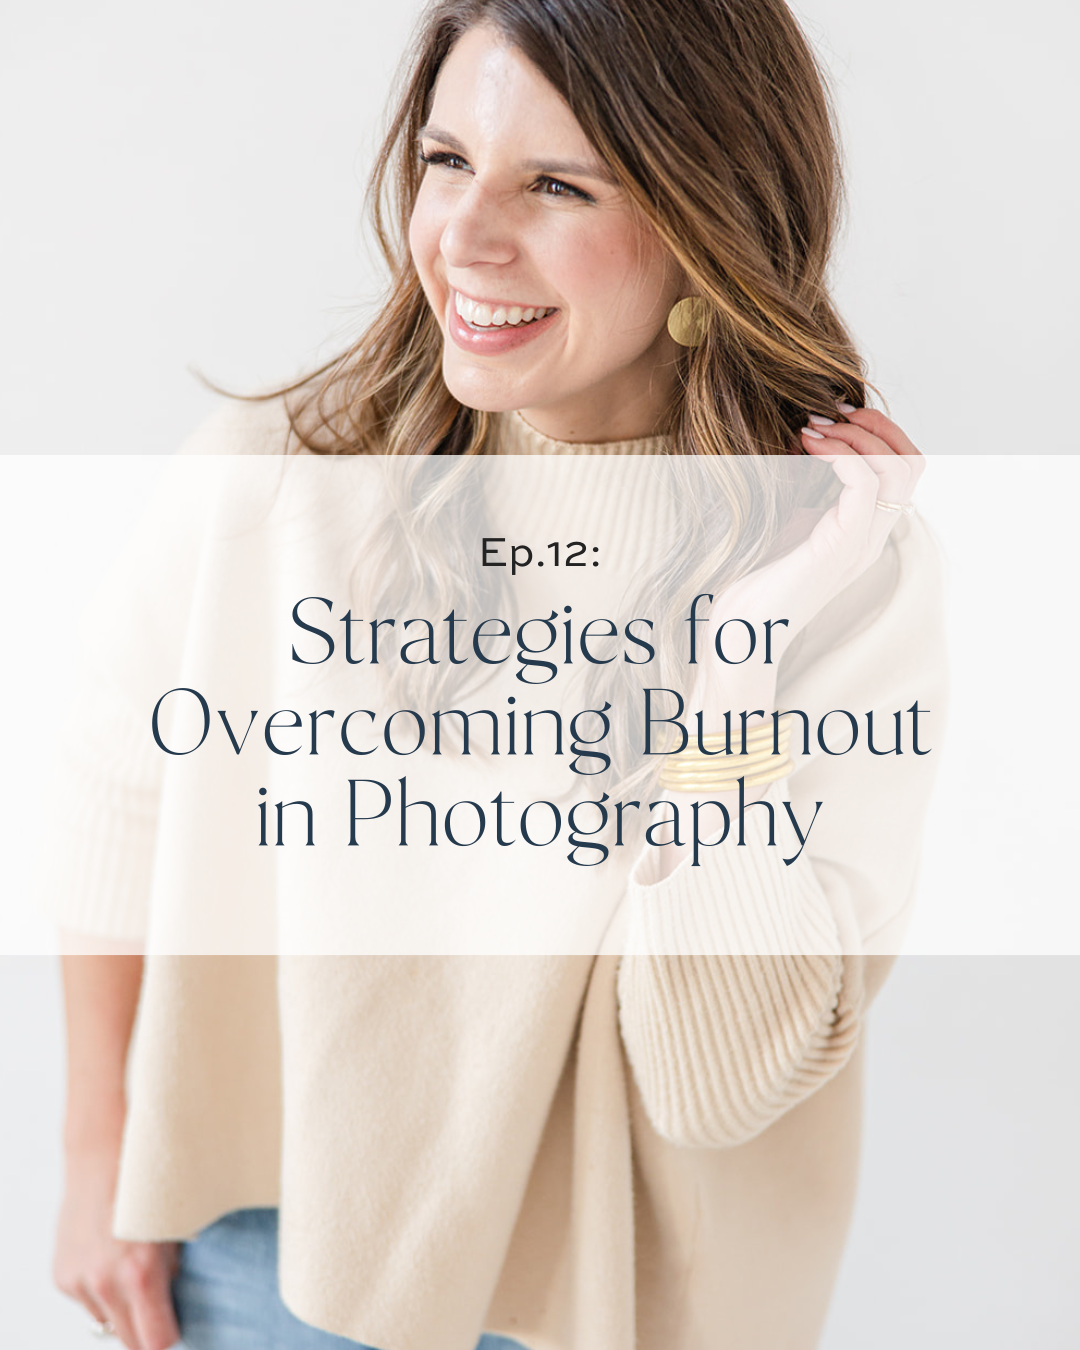 Strategies for Overcoming Burnout in Photography